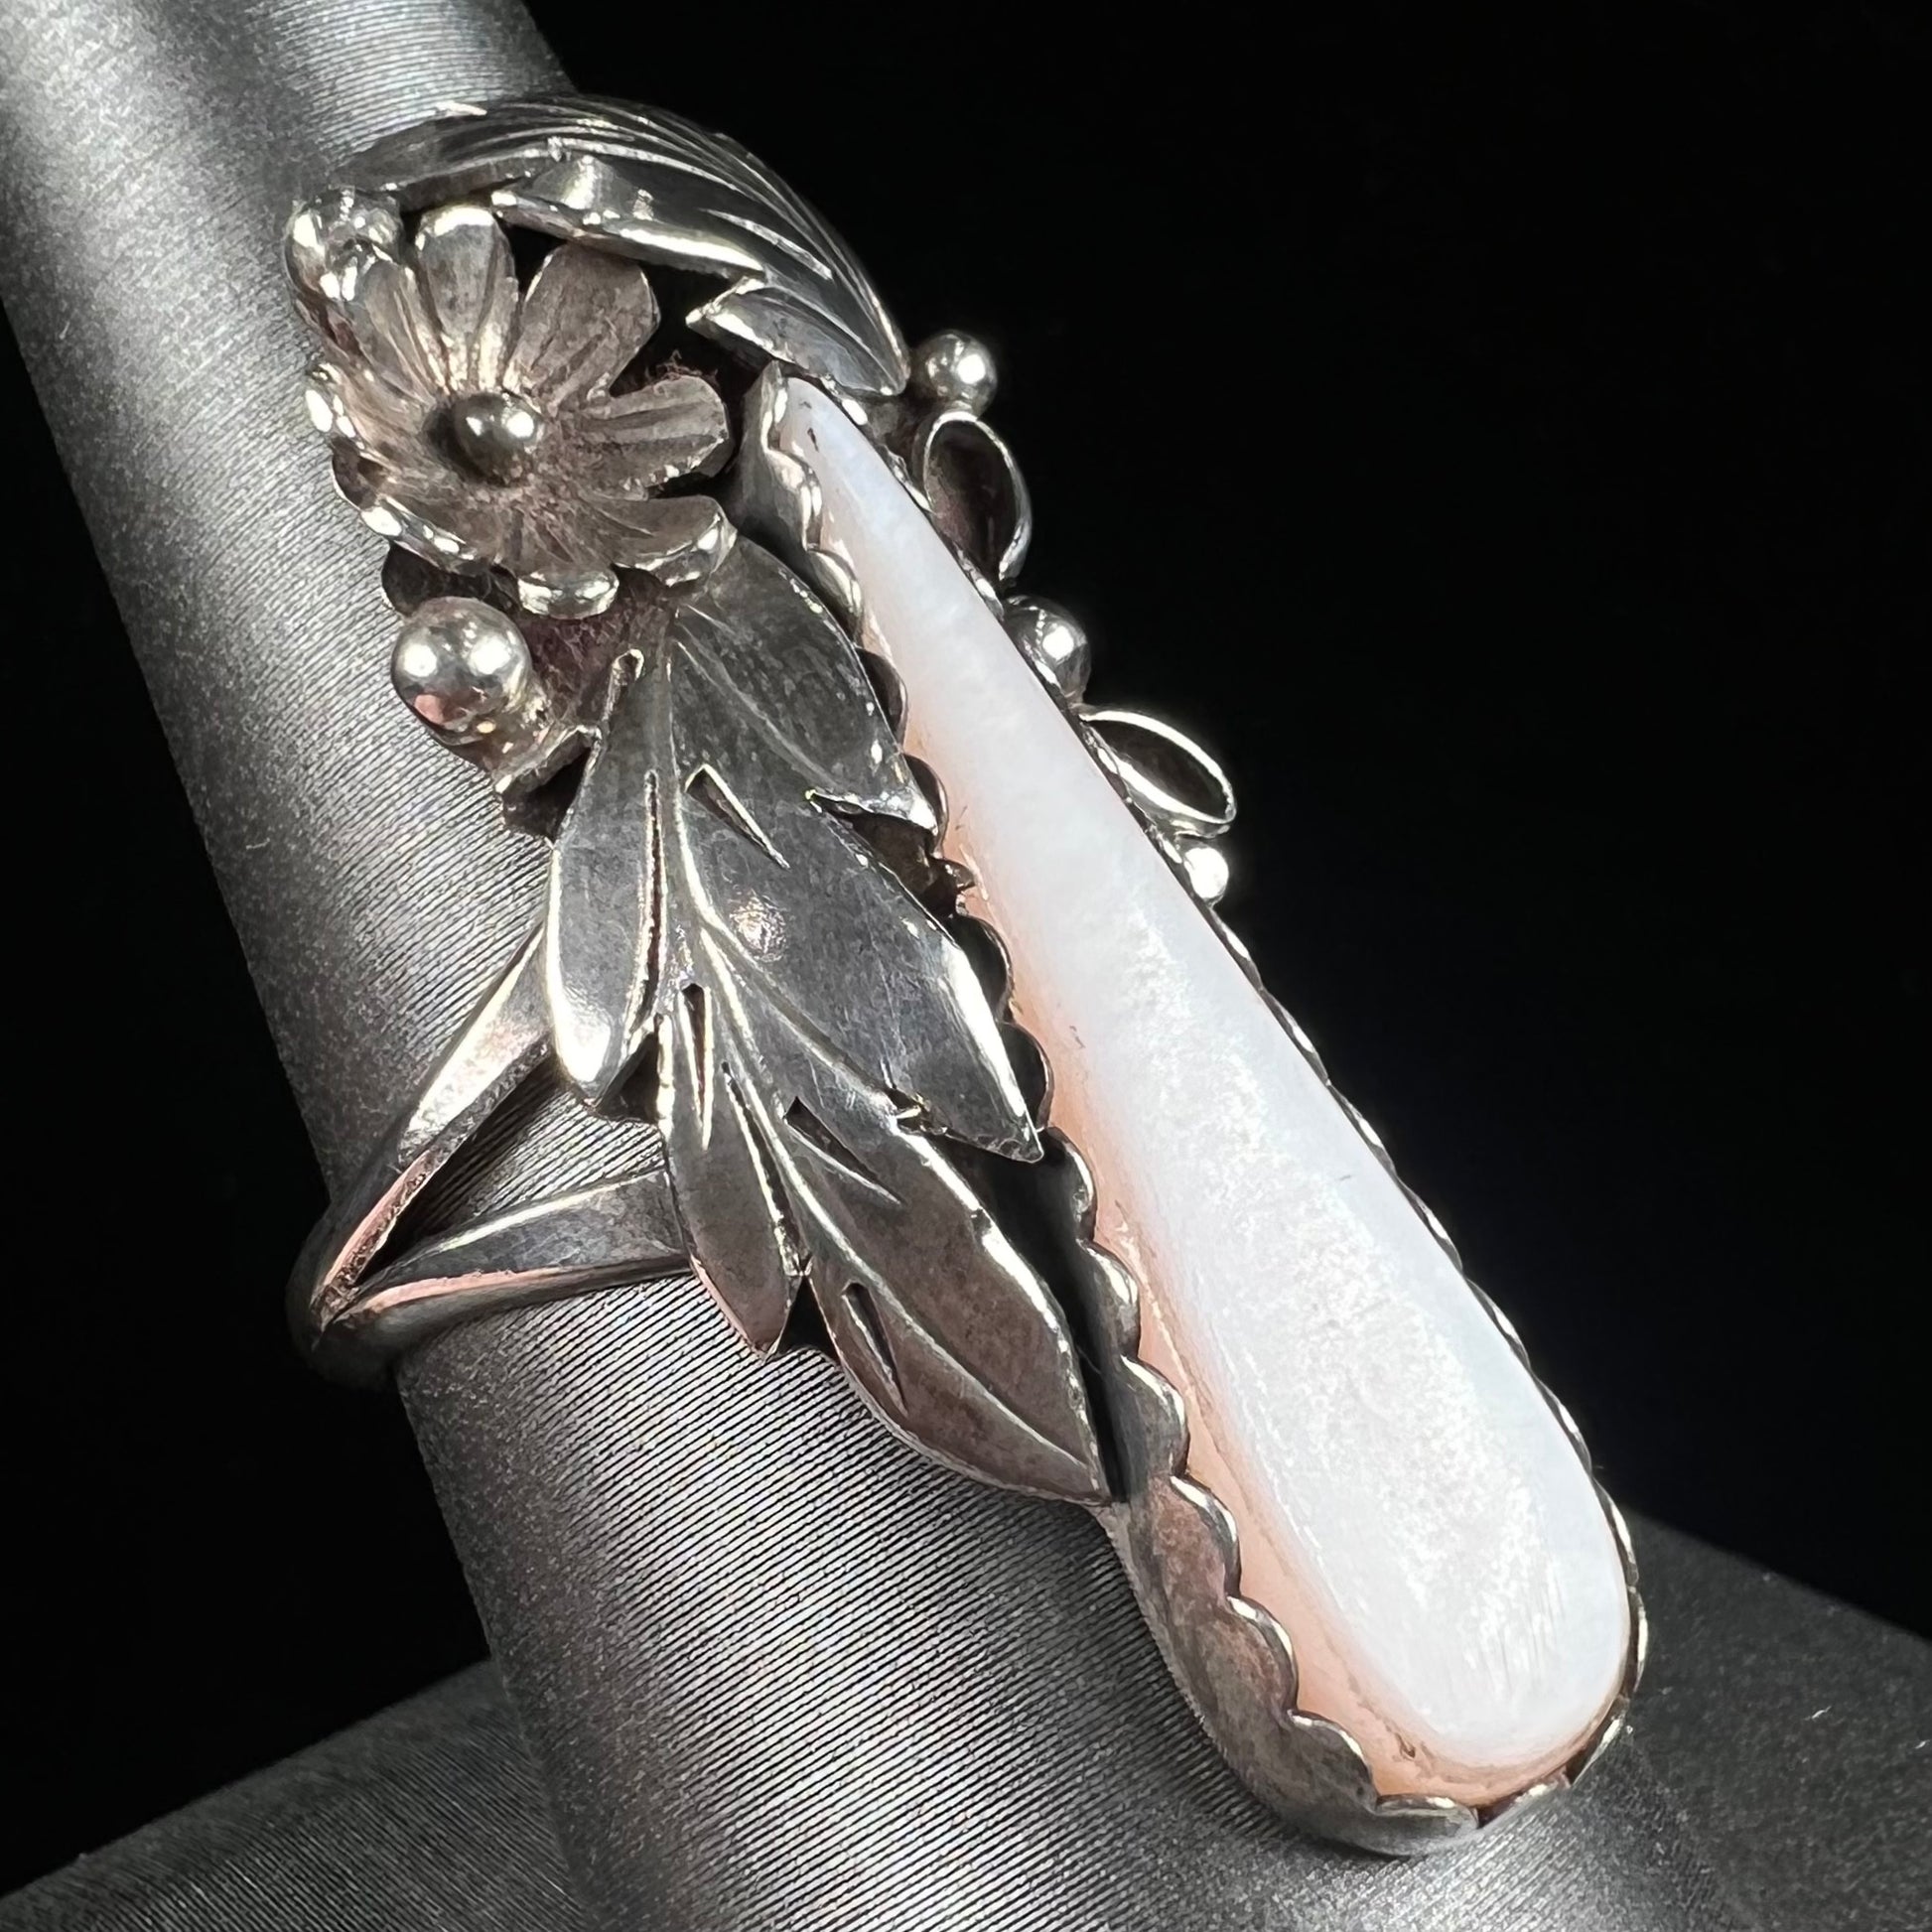 A sterling silver mother of pearl drop ring handmade in Navajo style, signed "MORNINGSTAR."